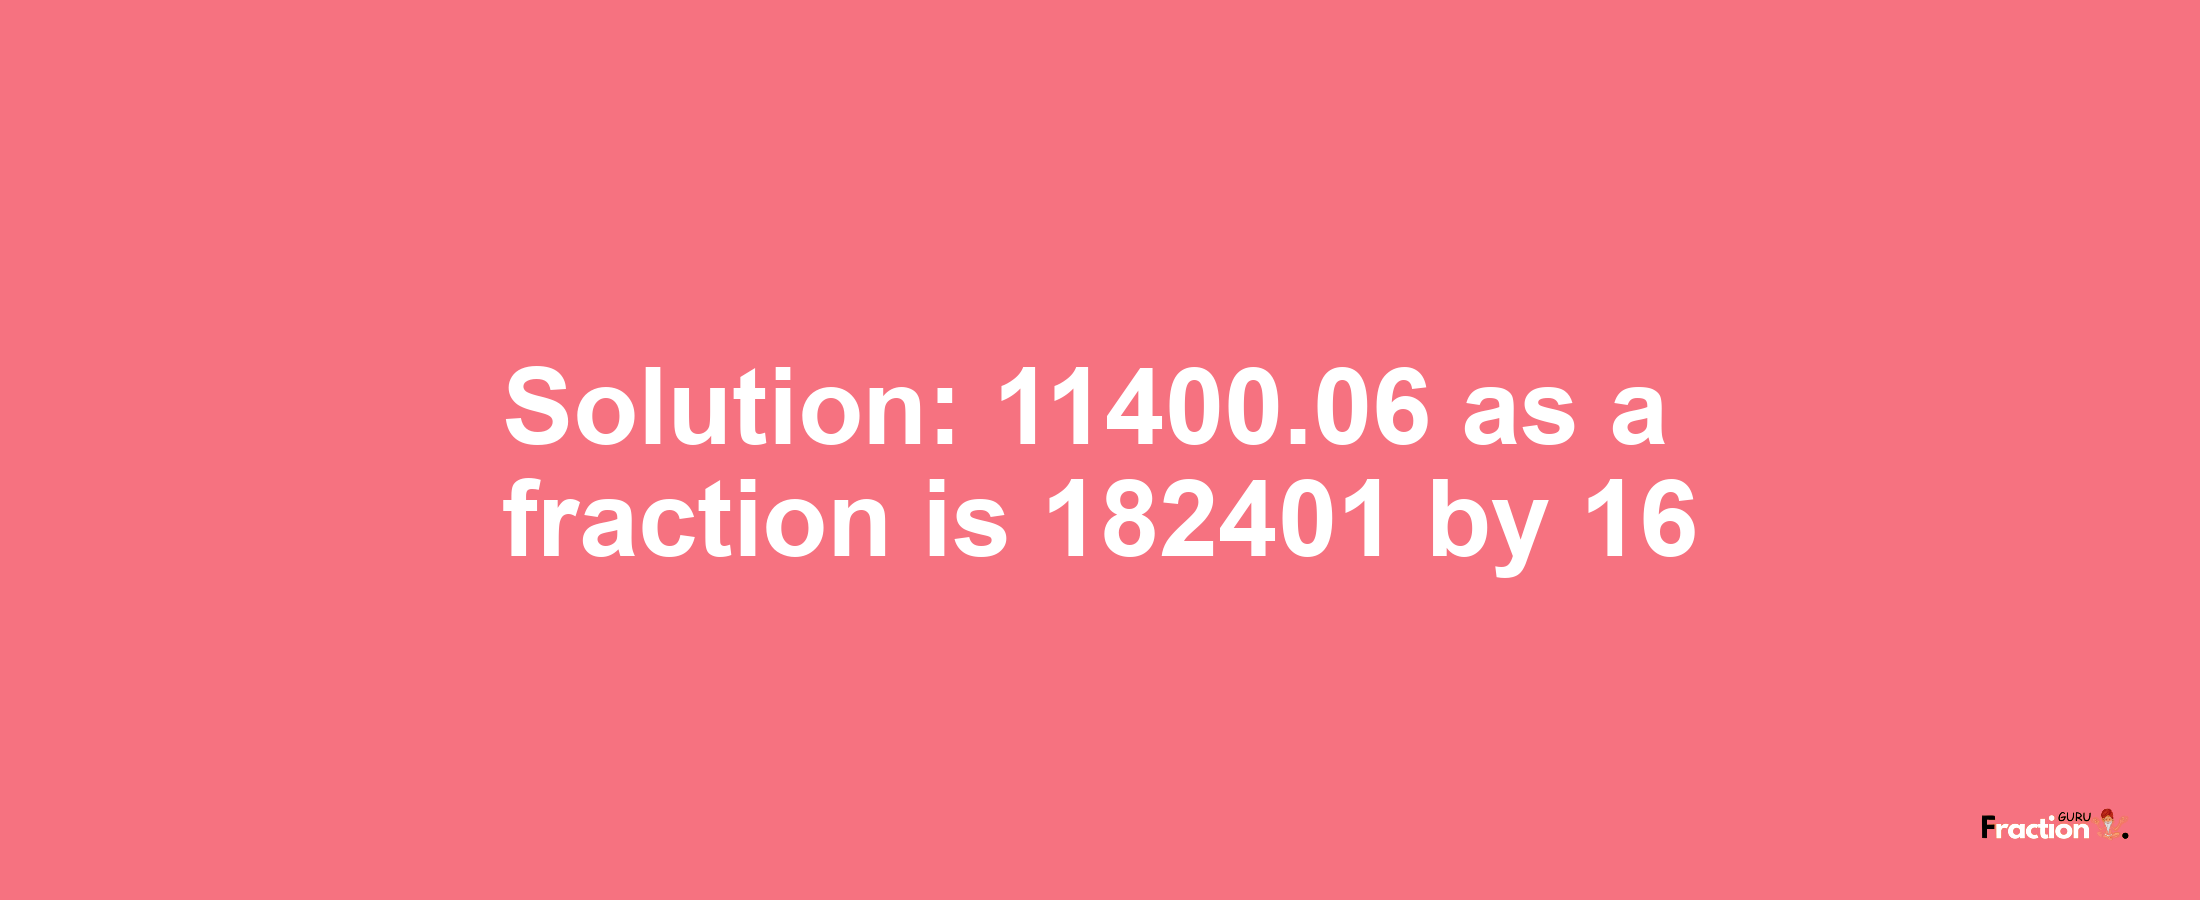 Solution:11400.06 as a fraction is 182401/16